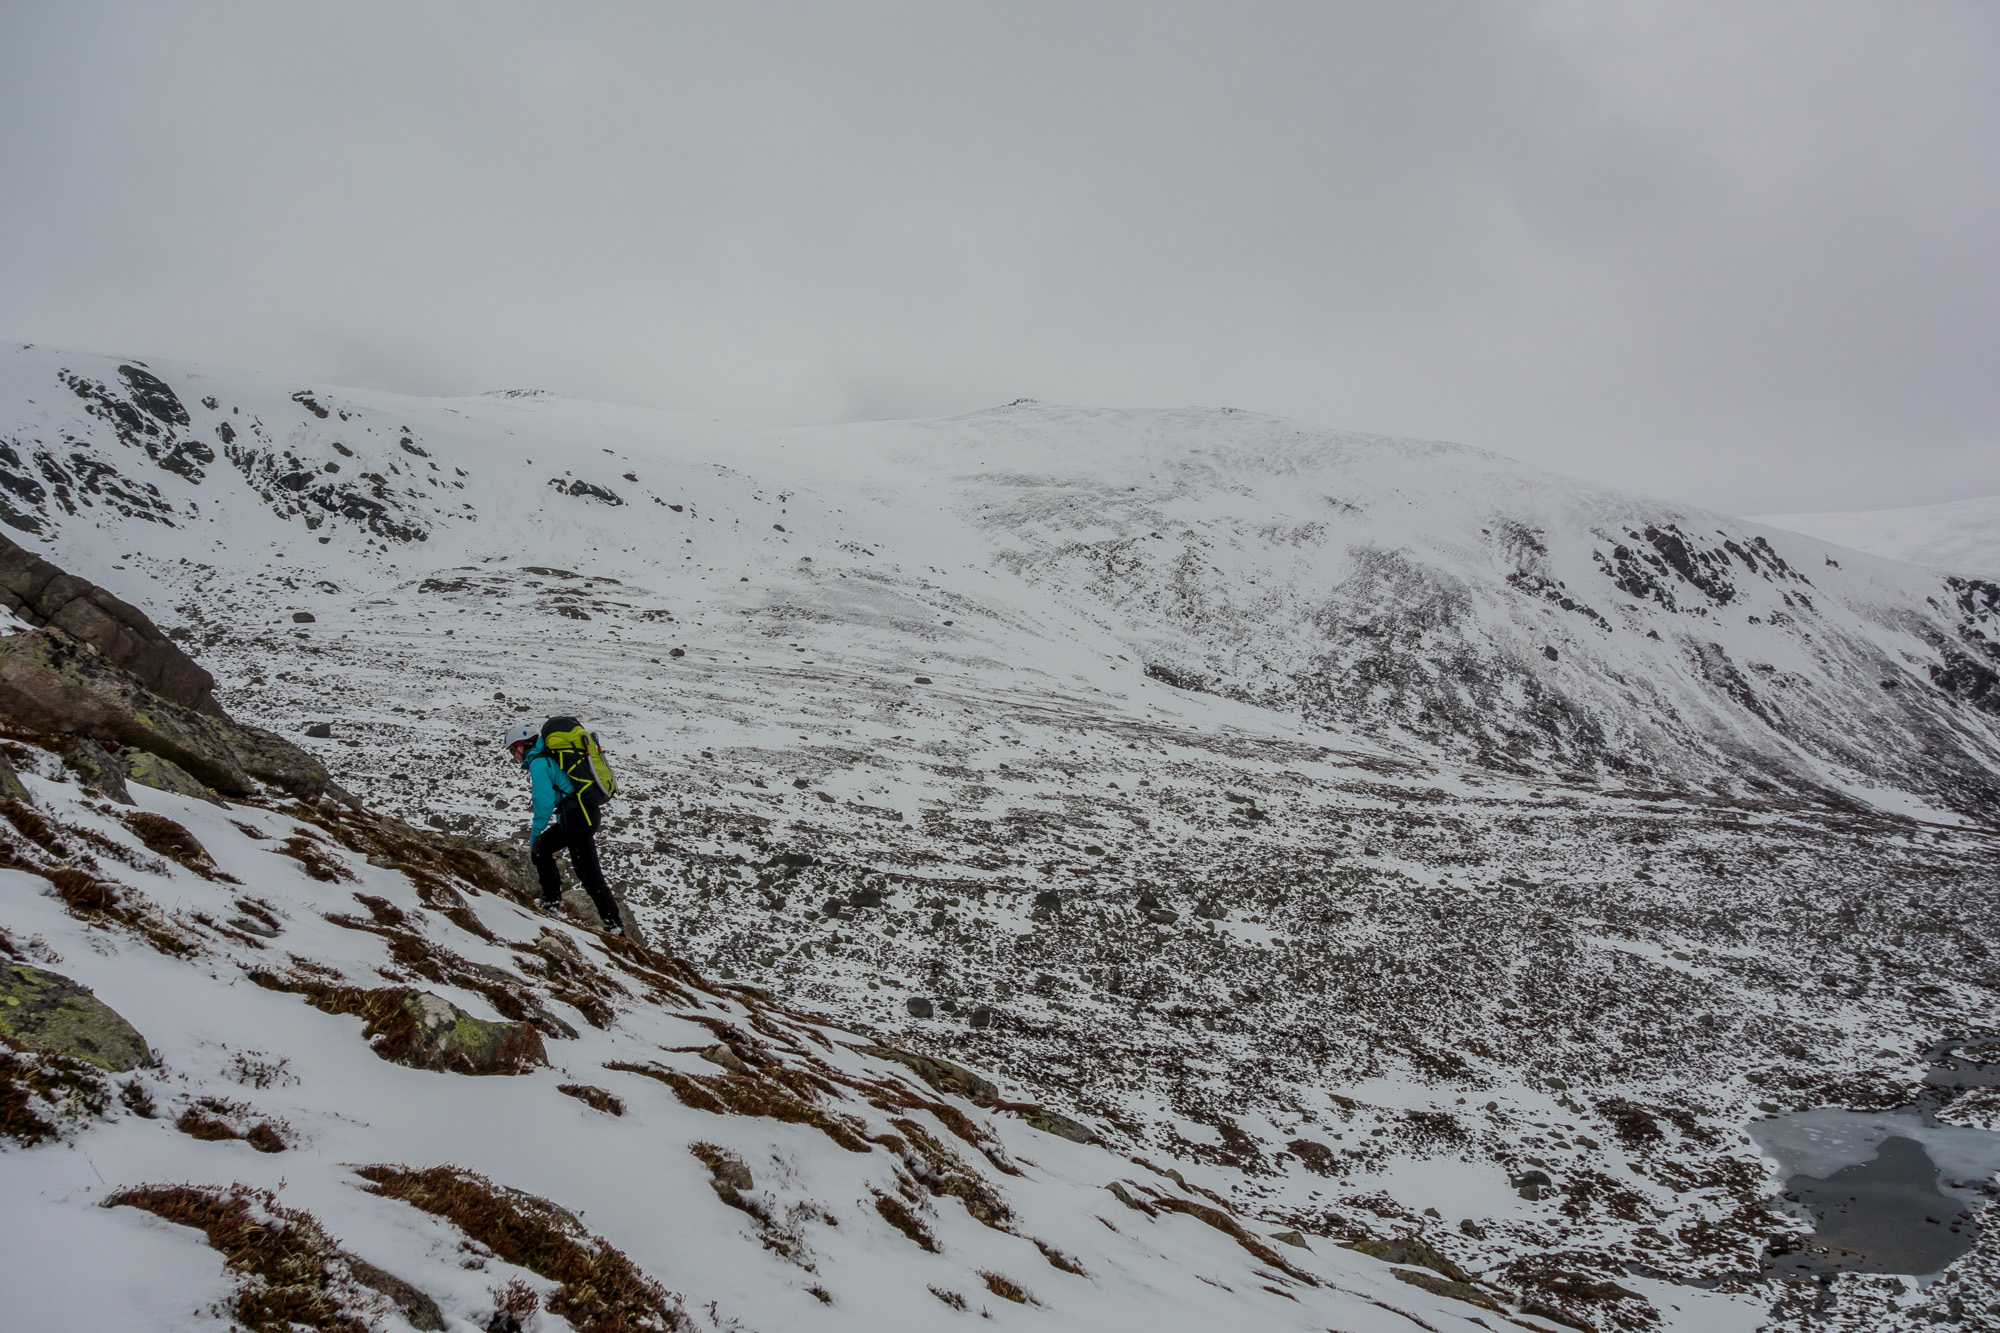 Debs approaches the base of the route as the weather turns moody